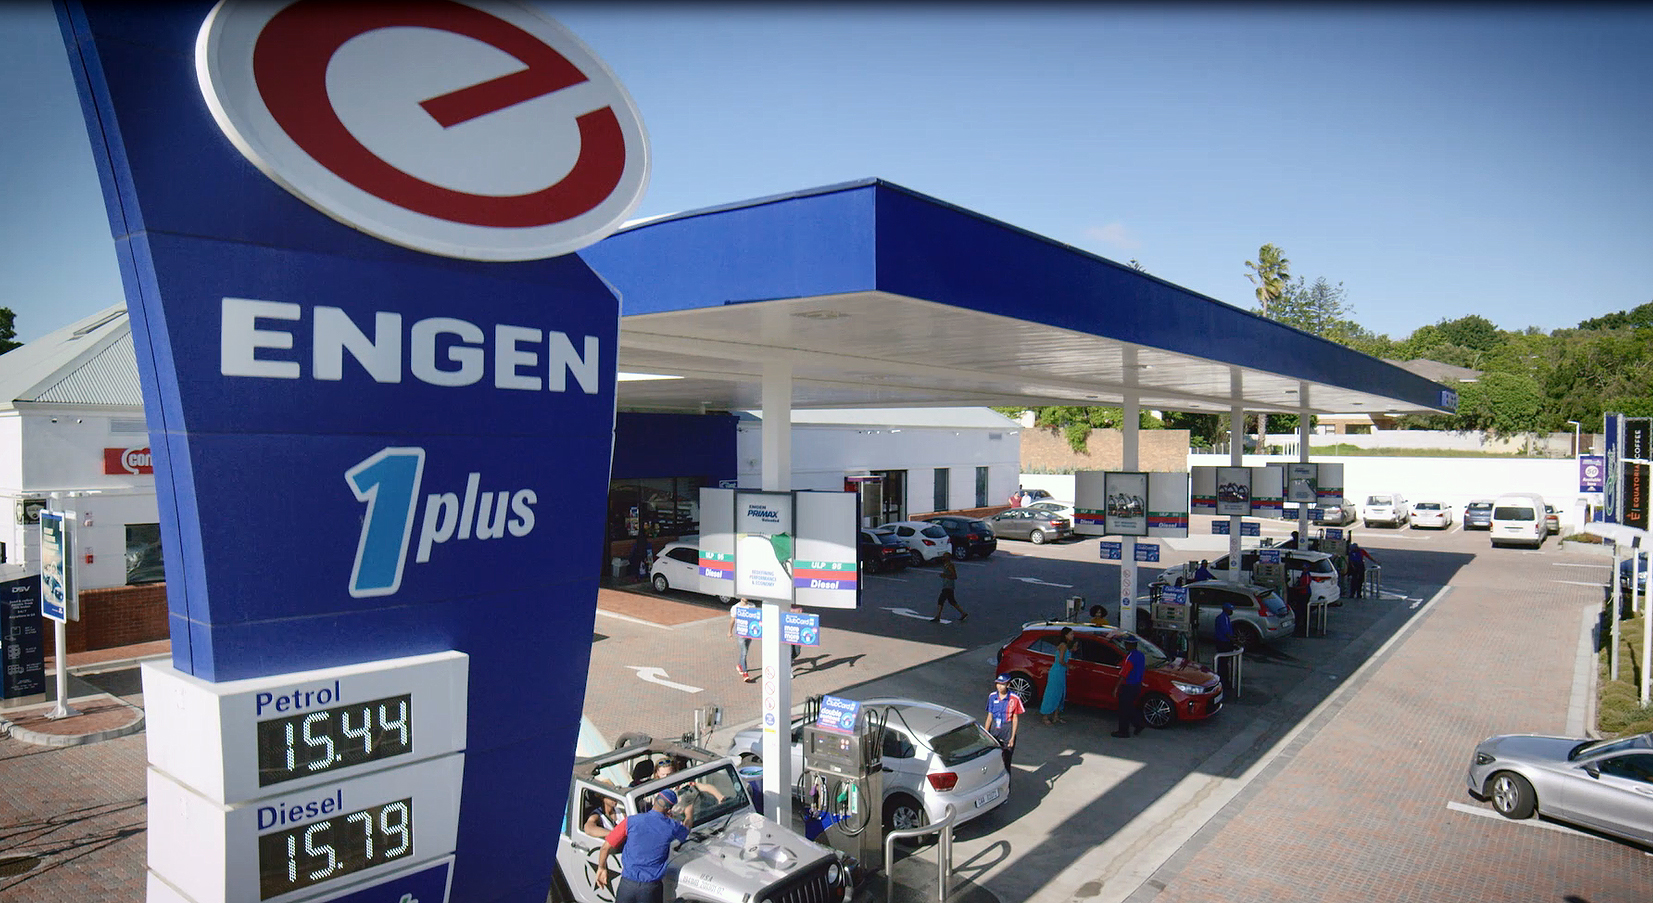 Mzansi’s youth say Engen is South Africa’s ‘Coolest’ Petrol Station